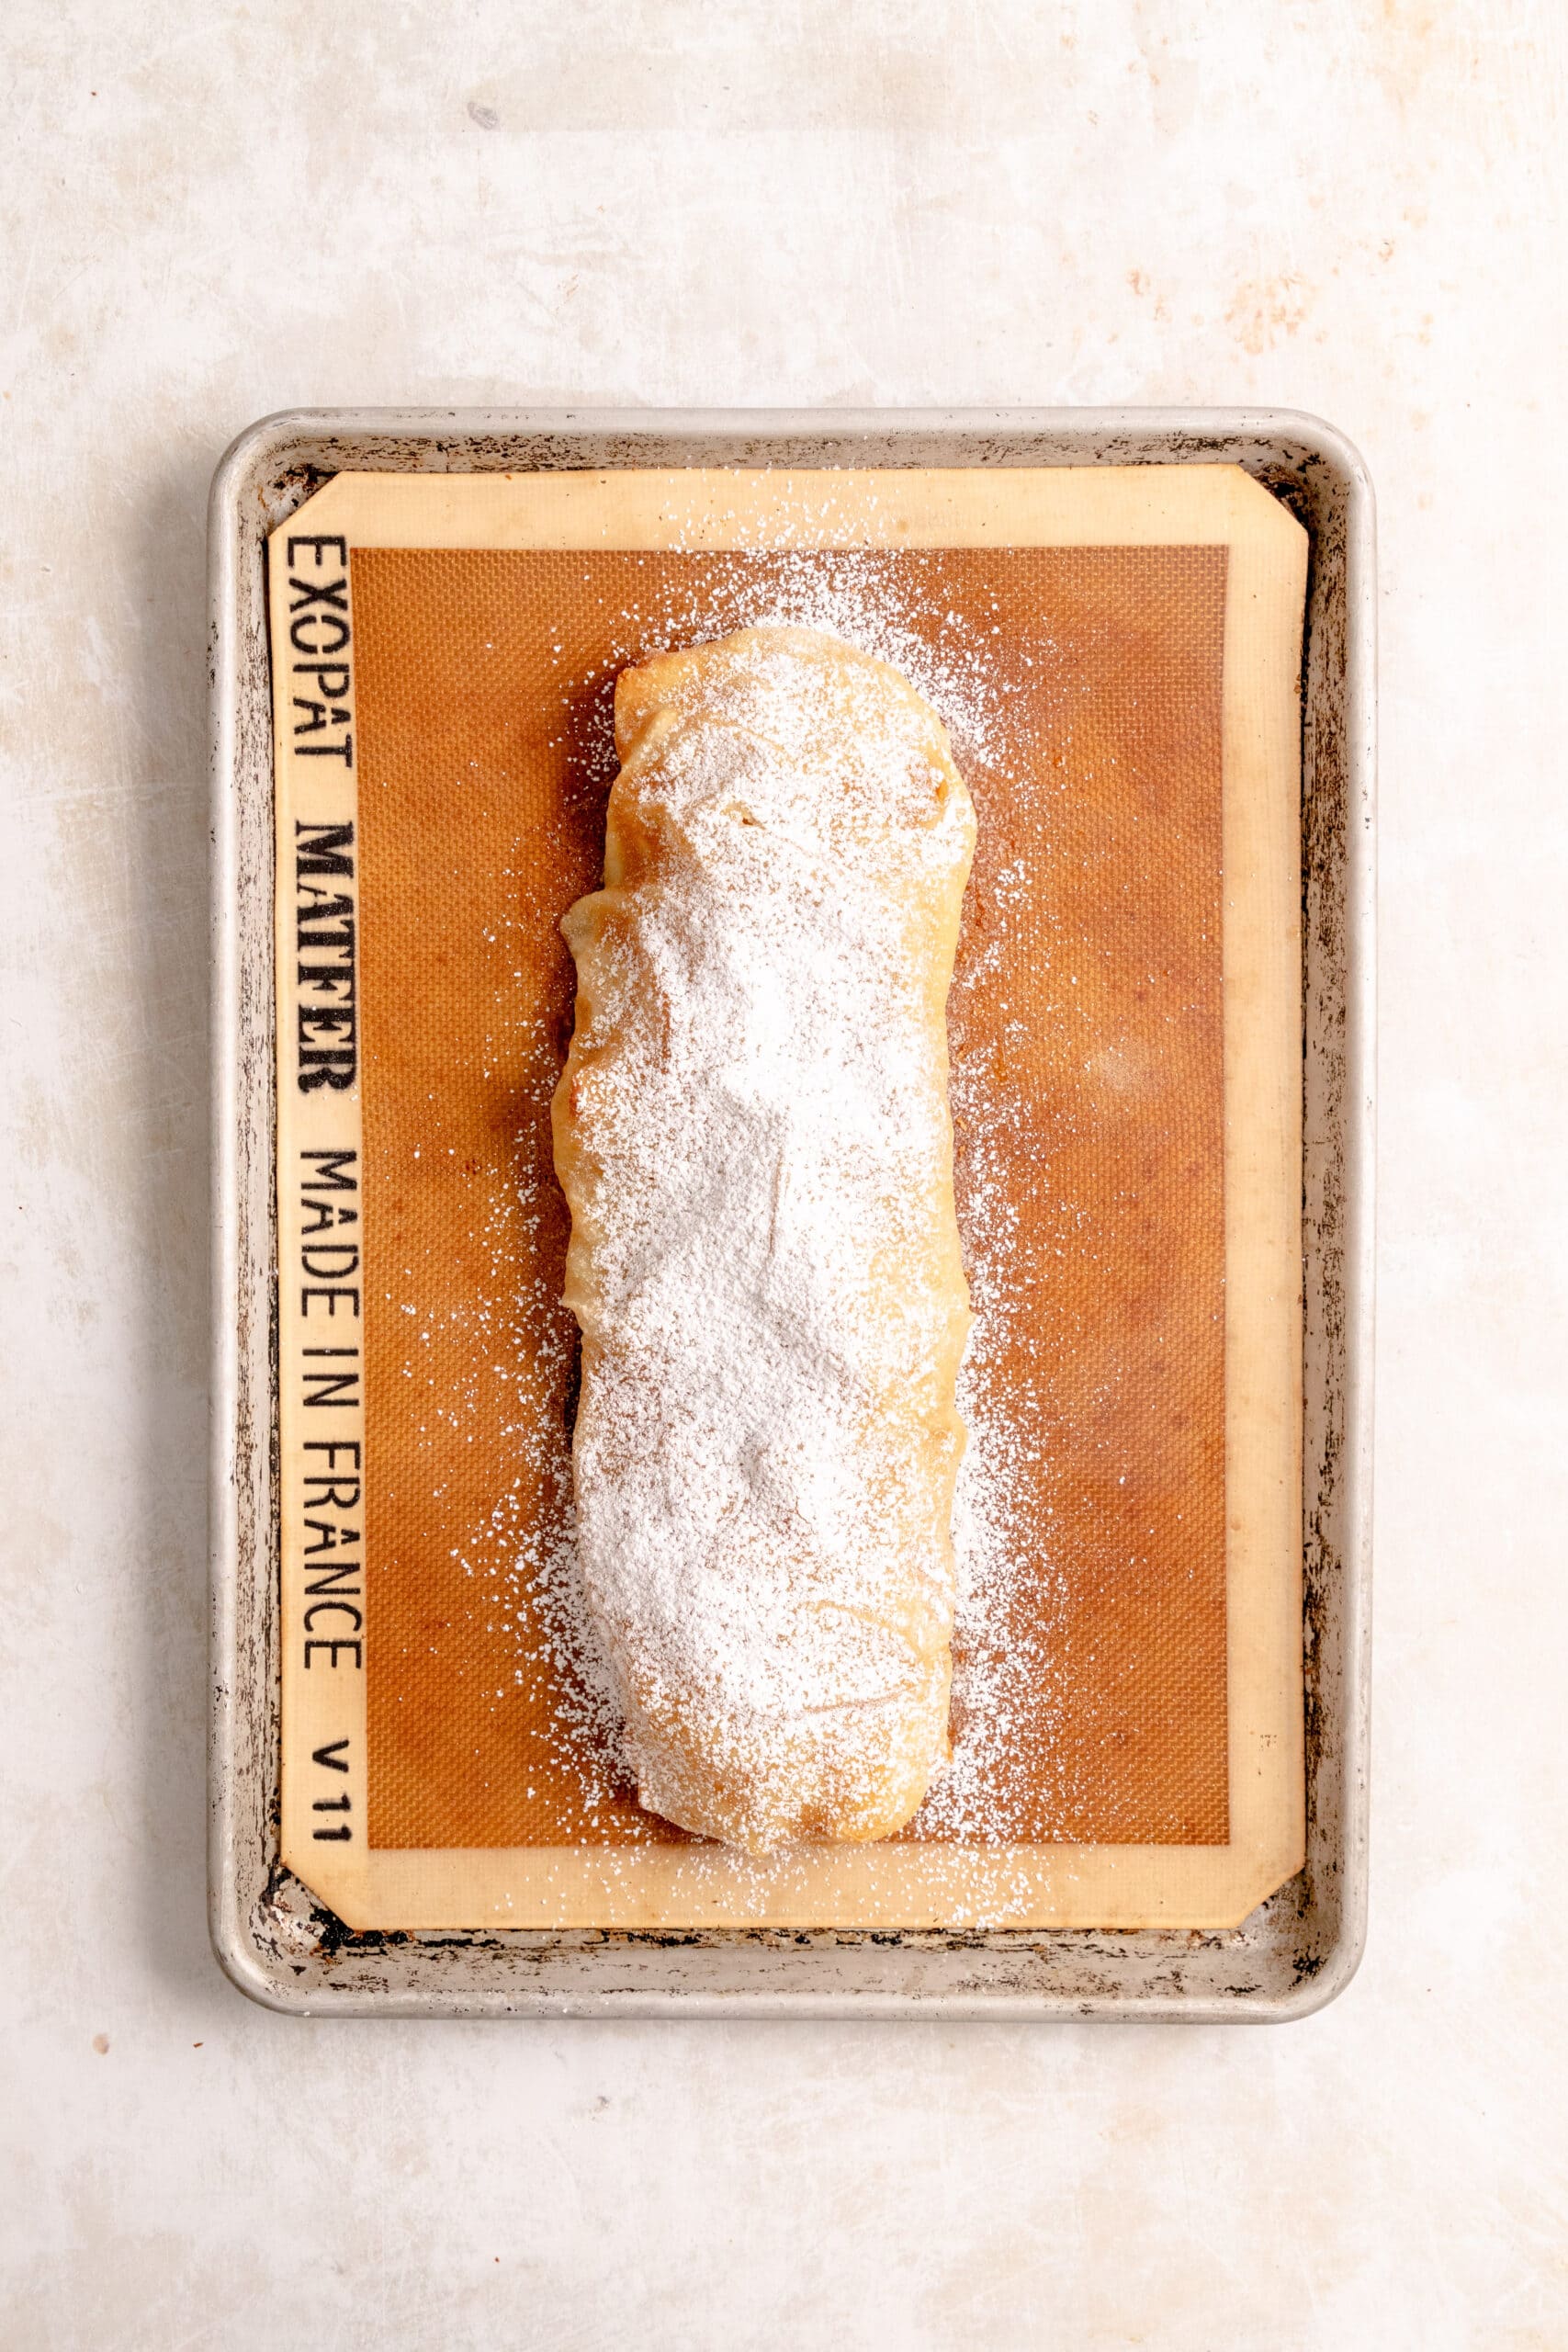 Baked apple strudel dusted with powdered sugar.